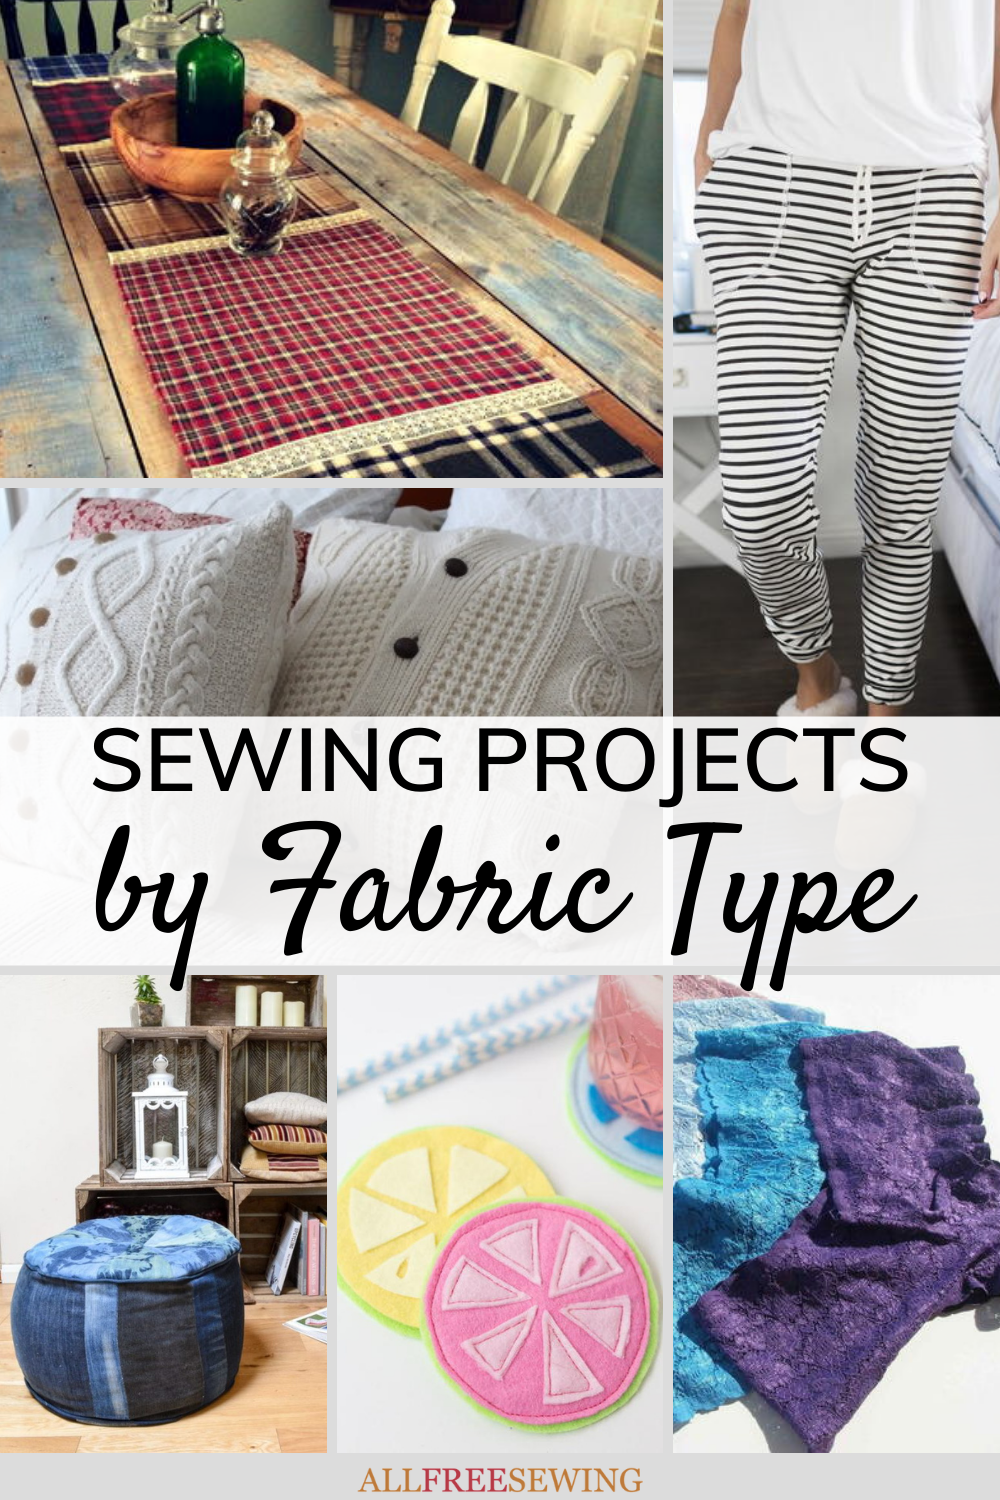 600+ Sewing Projects by Types of Fabric Materials